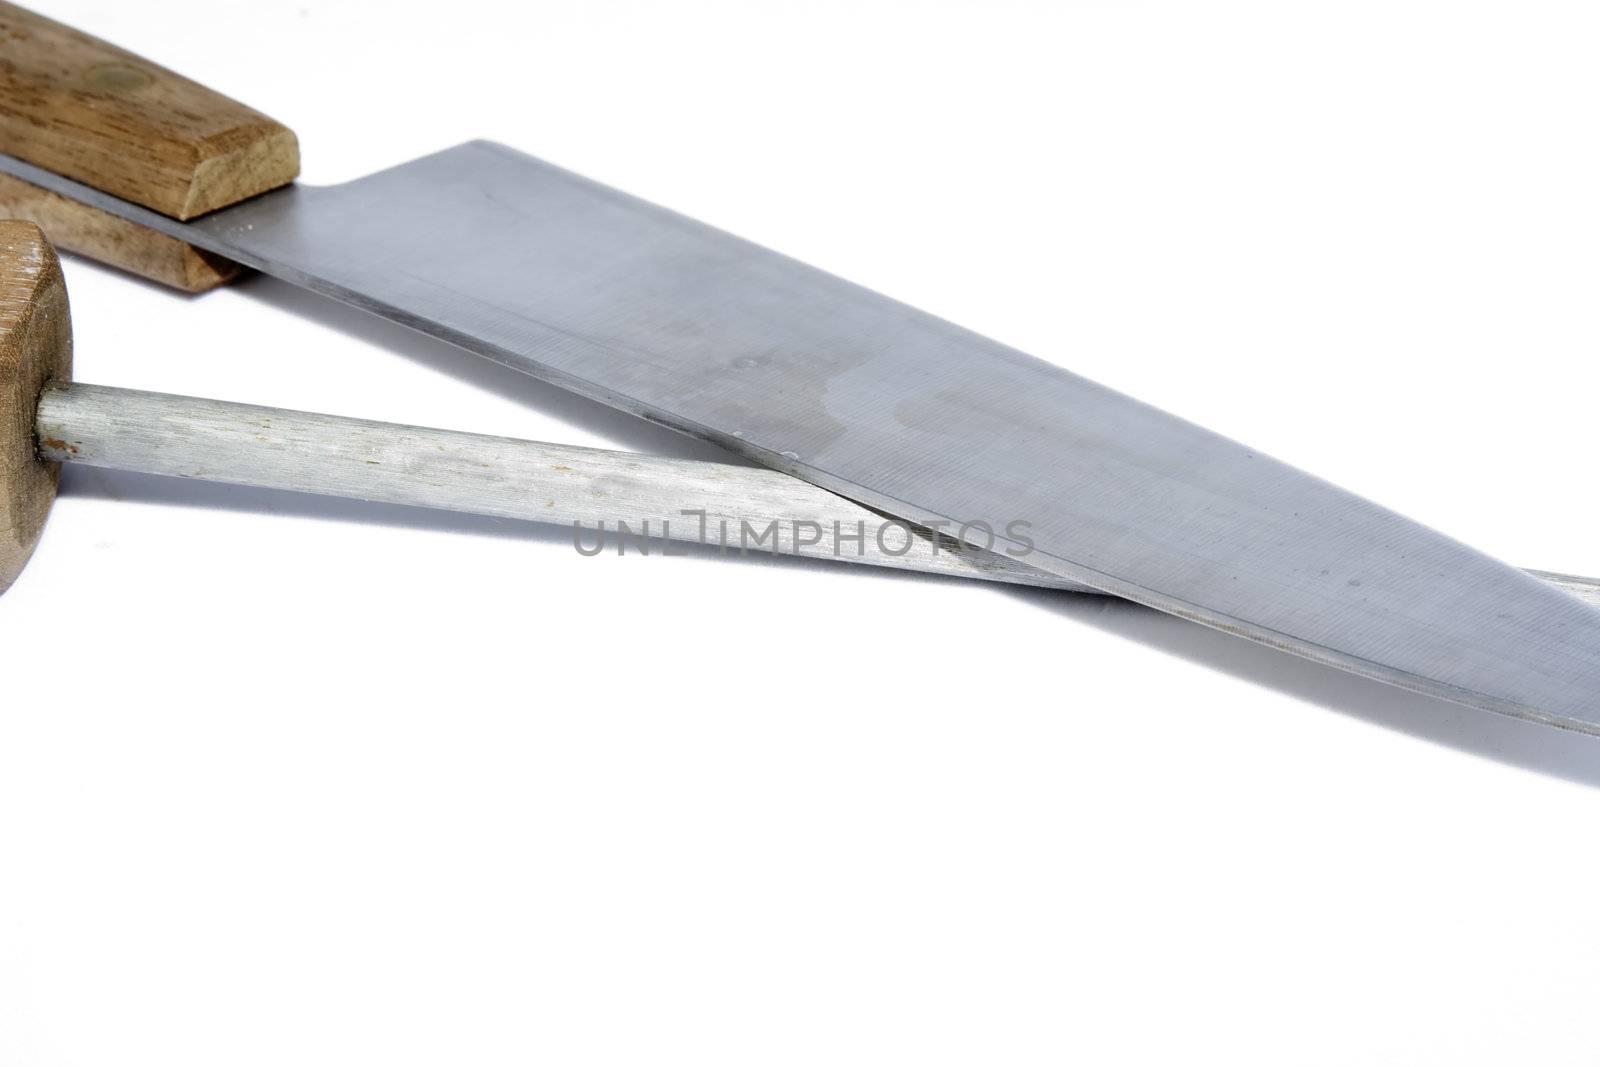 knife getting sharpened by a stell on white background